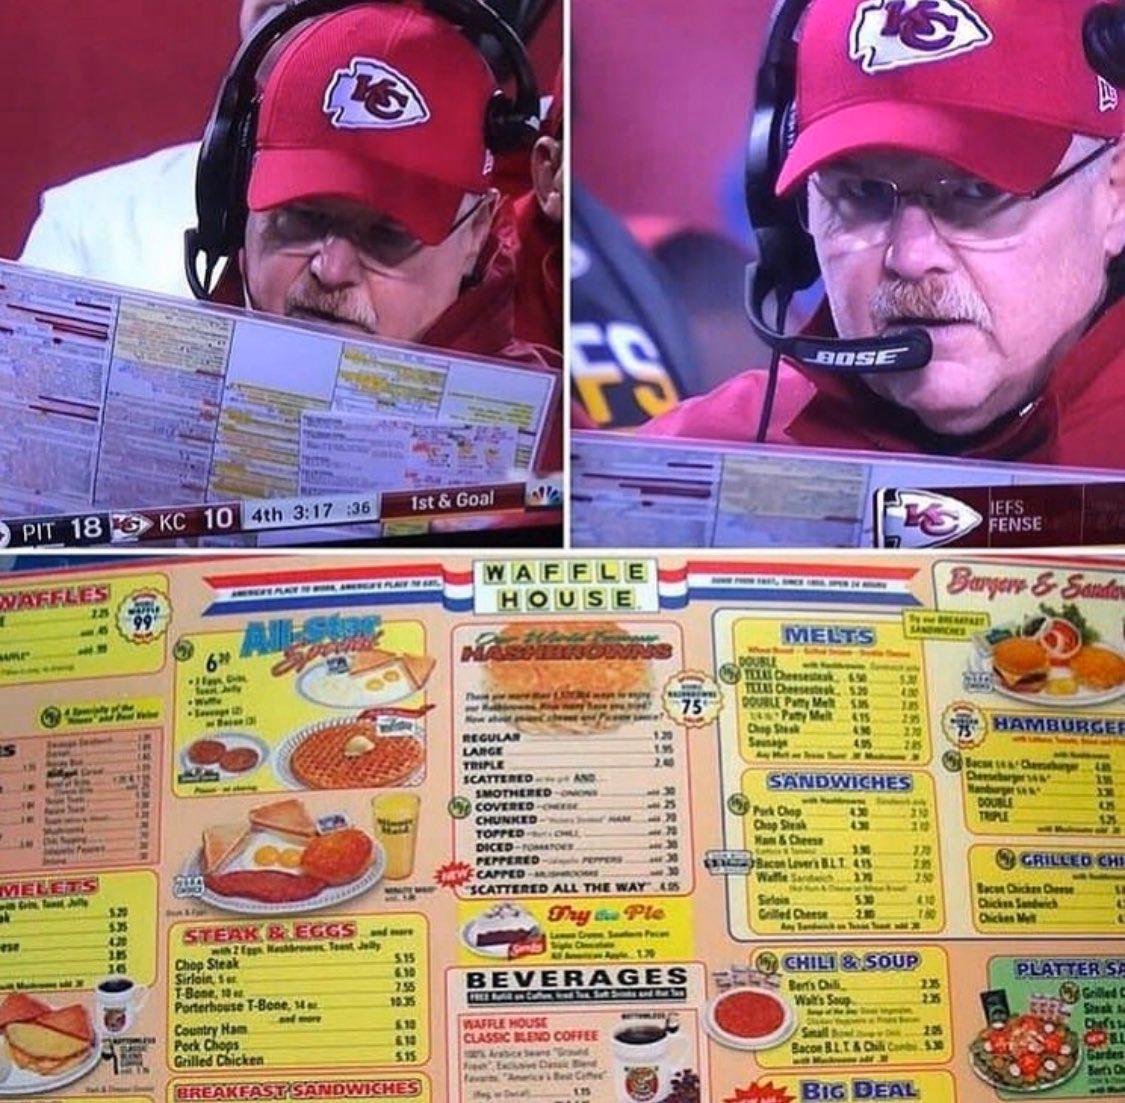 Some of These Kansas City Chiefs Memes Did Not Age Well at All